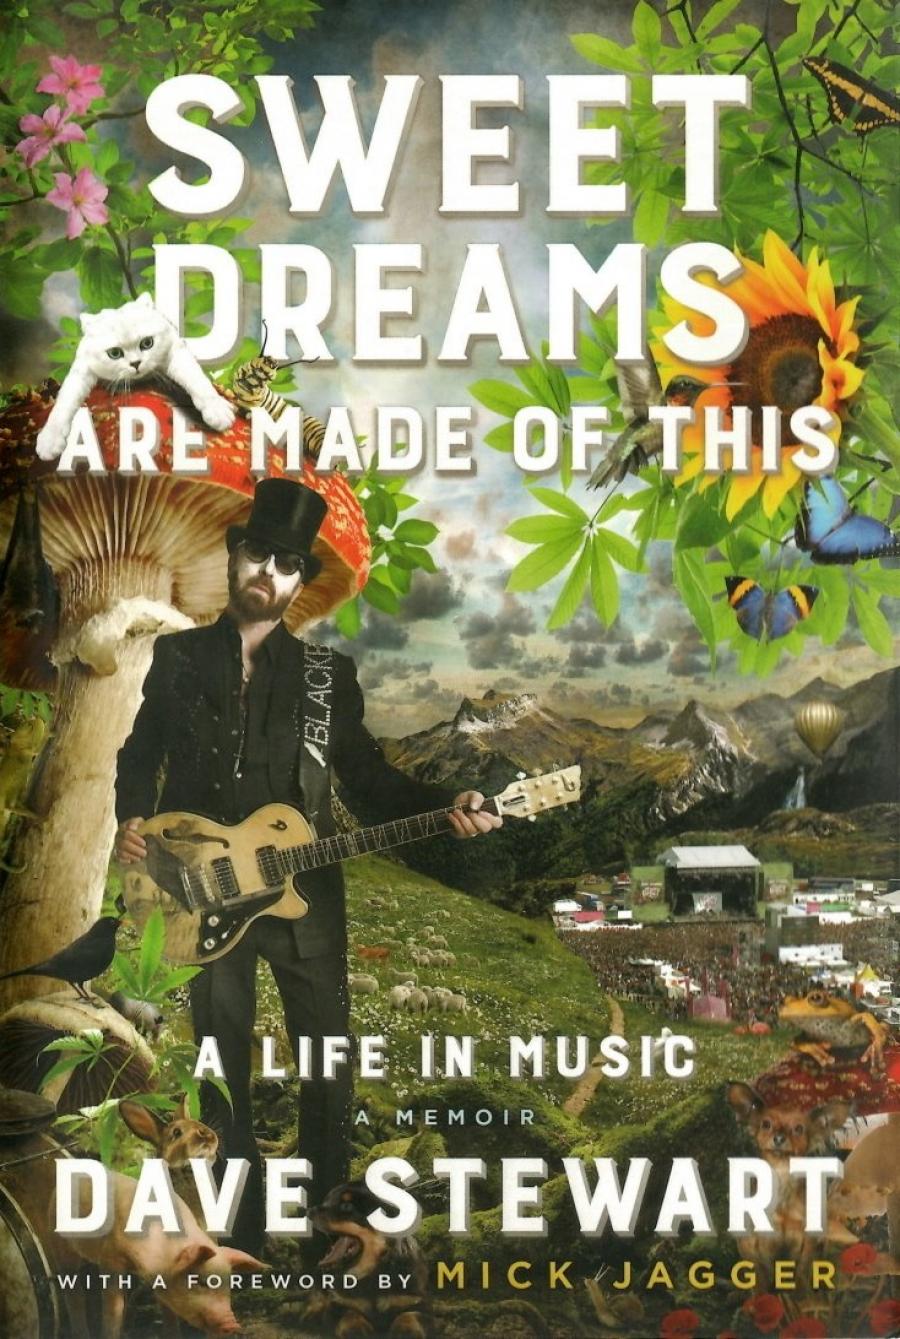 Forside på Sweet dreams are made of this : a life in music Af Dave Stewart (2016)